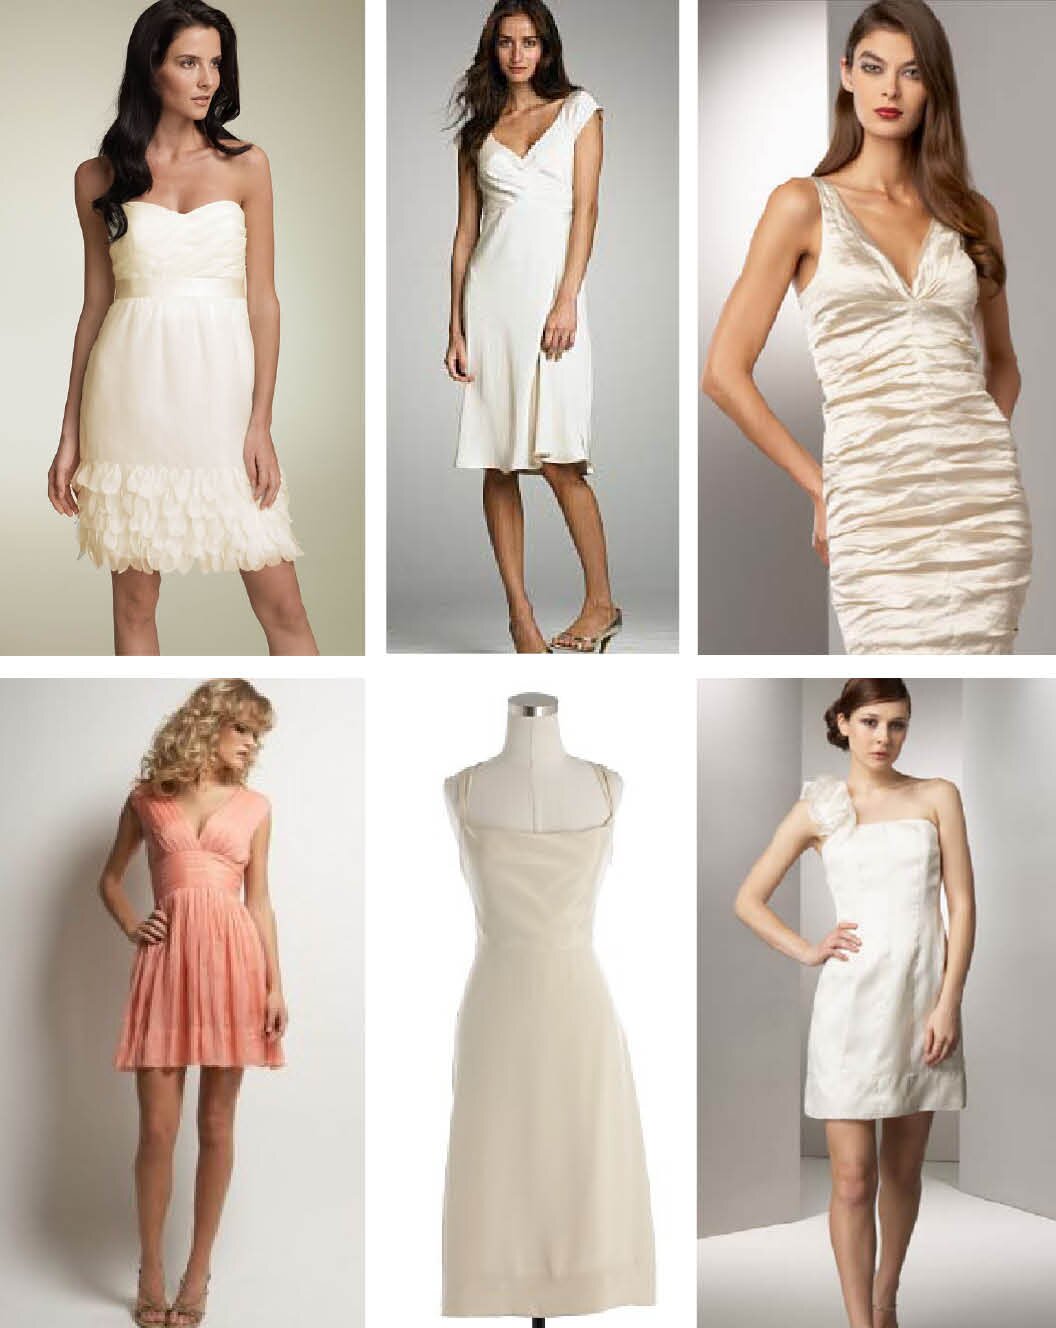 Wedding party dresses for women Photo - 10